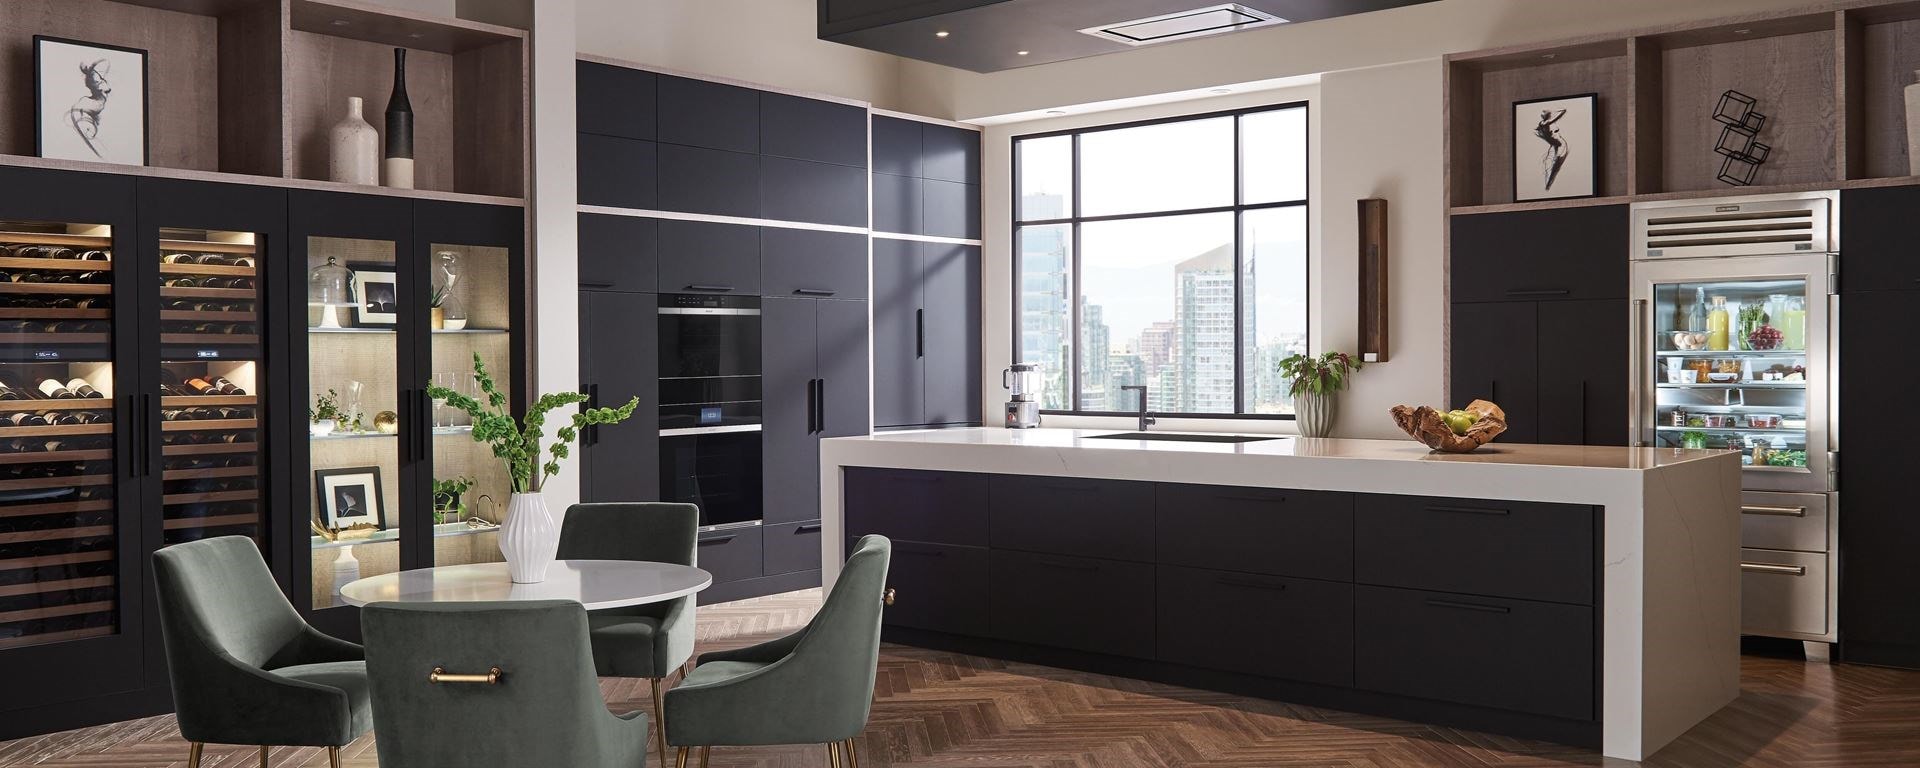 Sophisticated and fashionable custom kitchen design showcasing Sub-Zero see-thru-door refrigerator and Wolf Contemporary Stainless Steel Convection Steam Oven